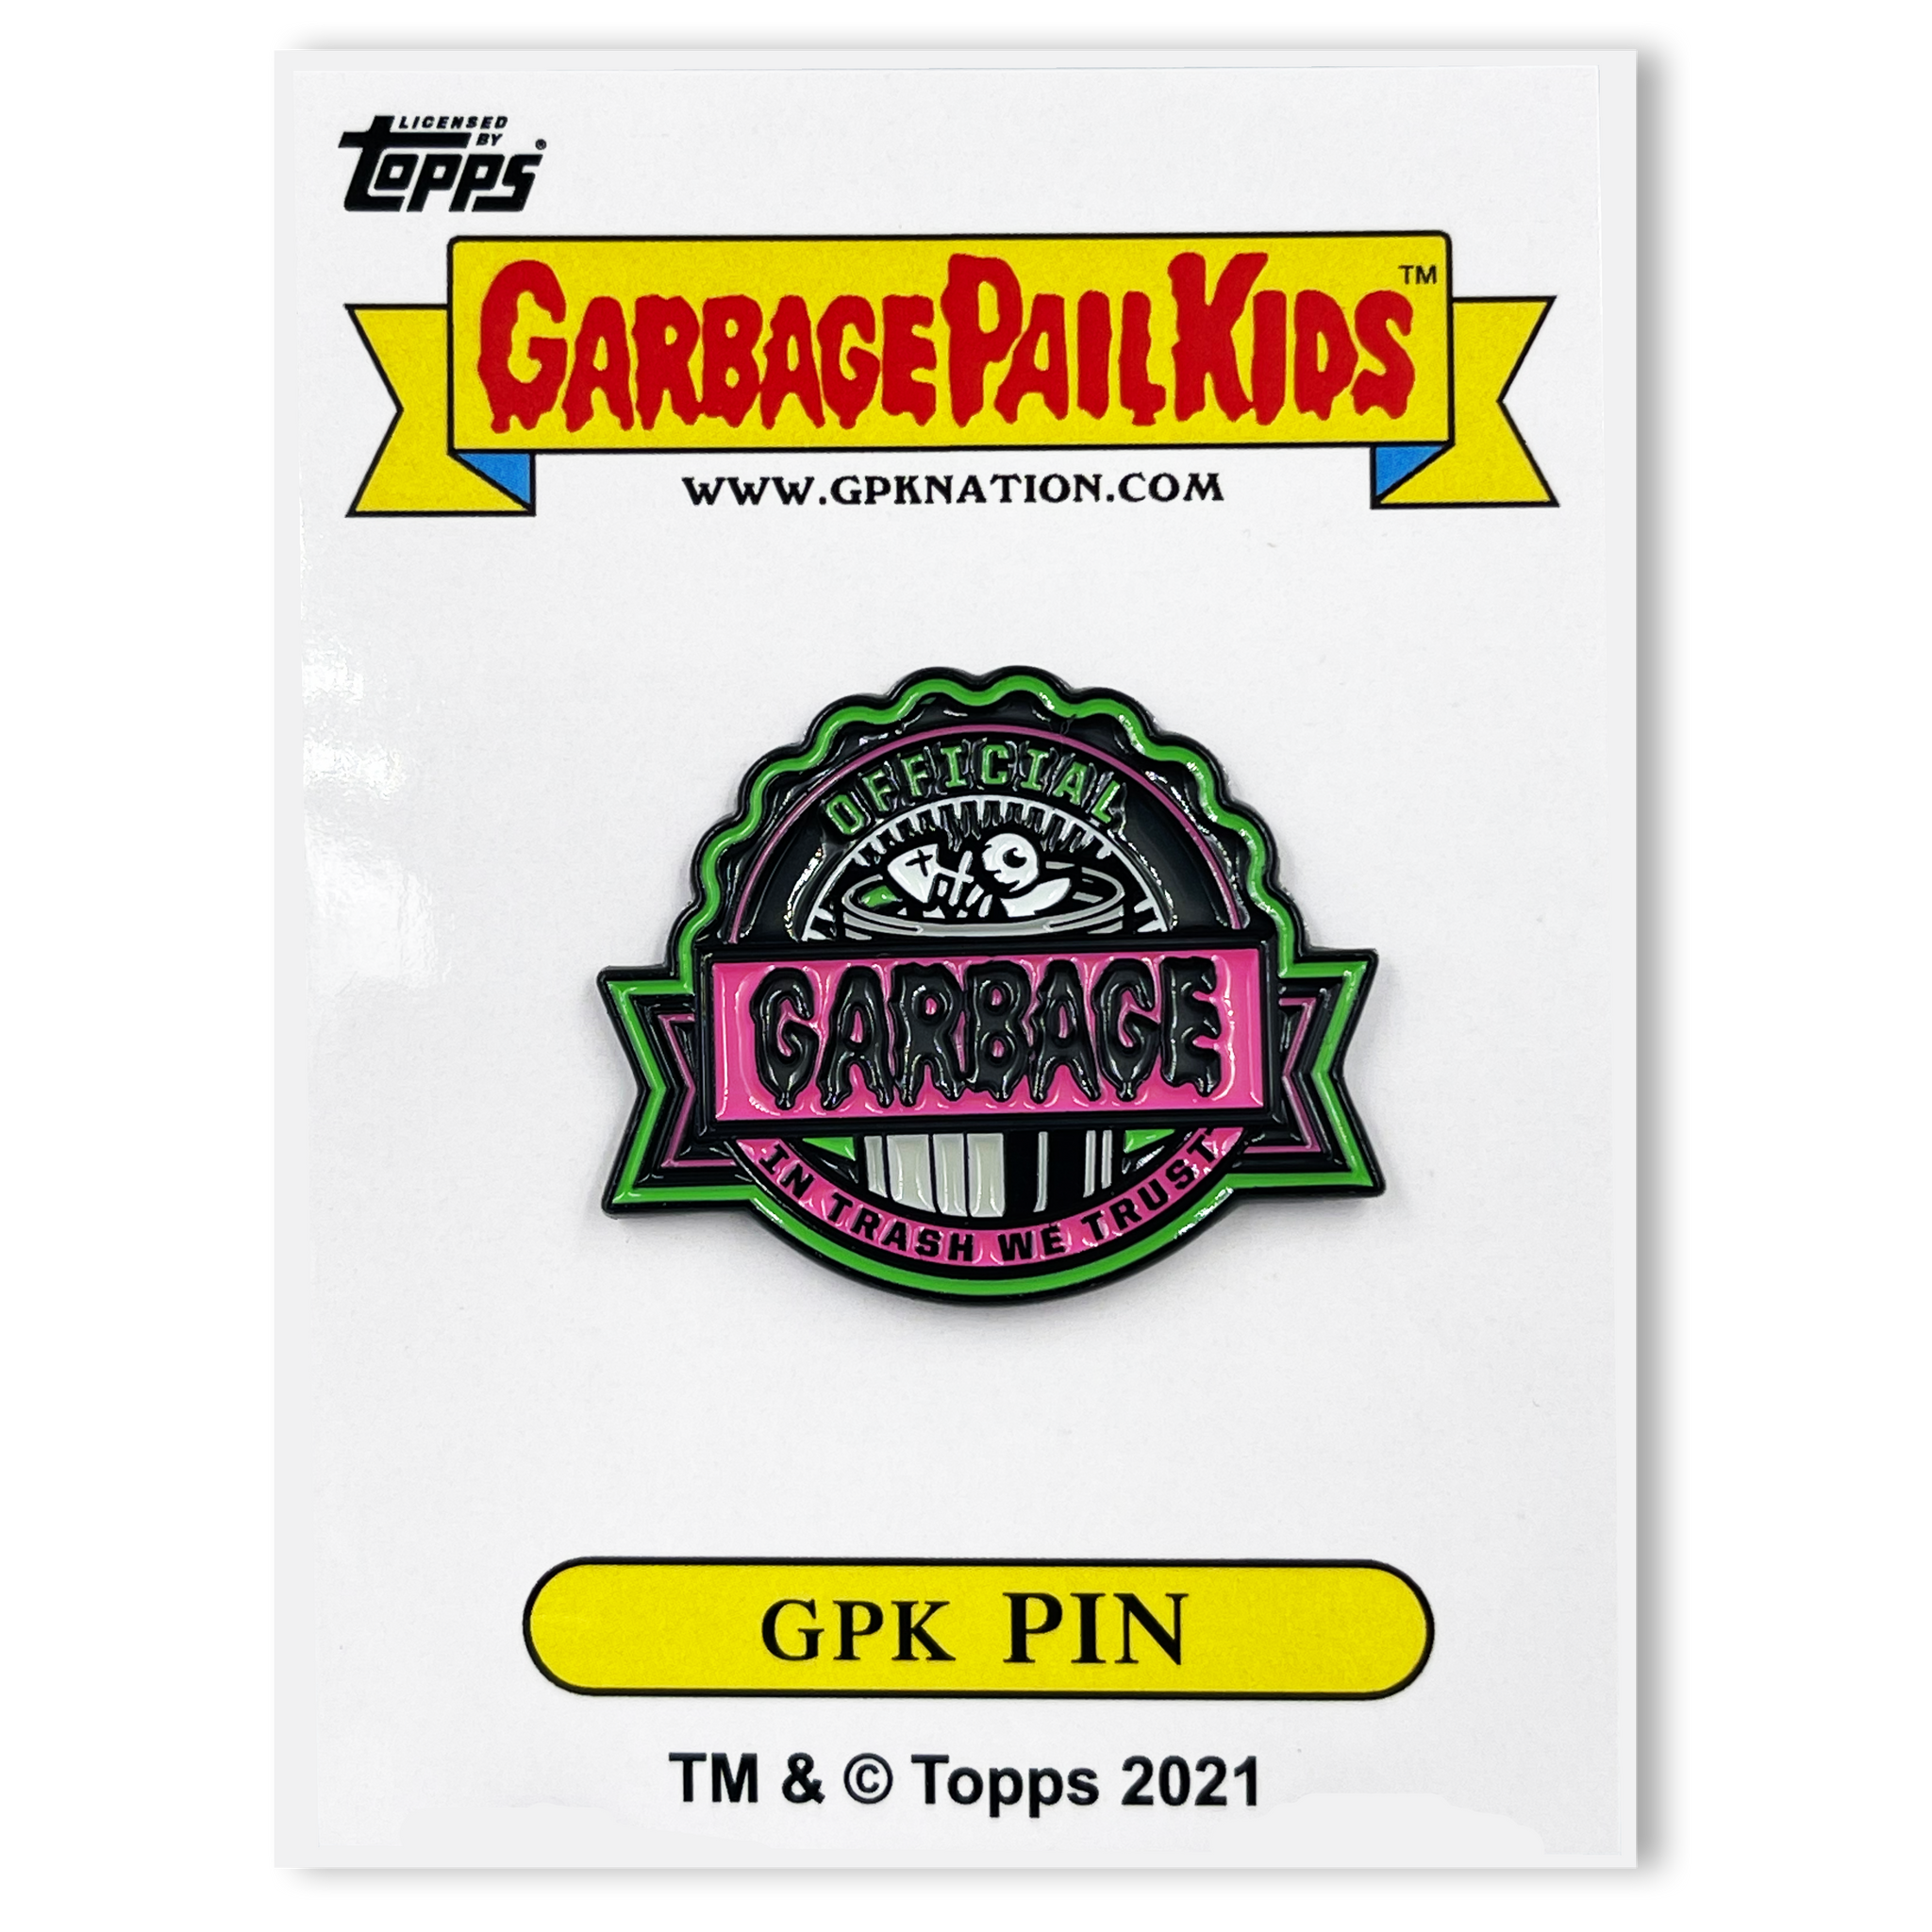 Pink and Green 2021 Garbage Pail Kids logo Officially Licensed GPK pin